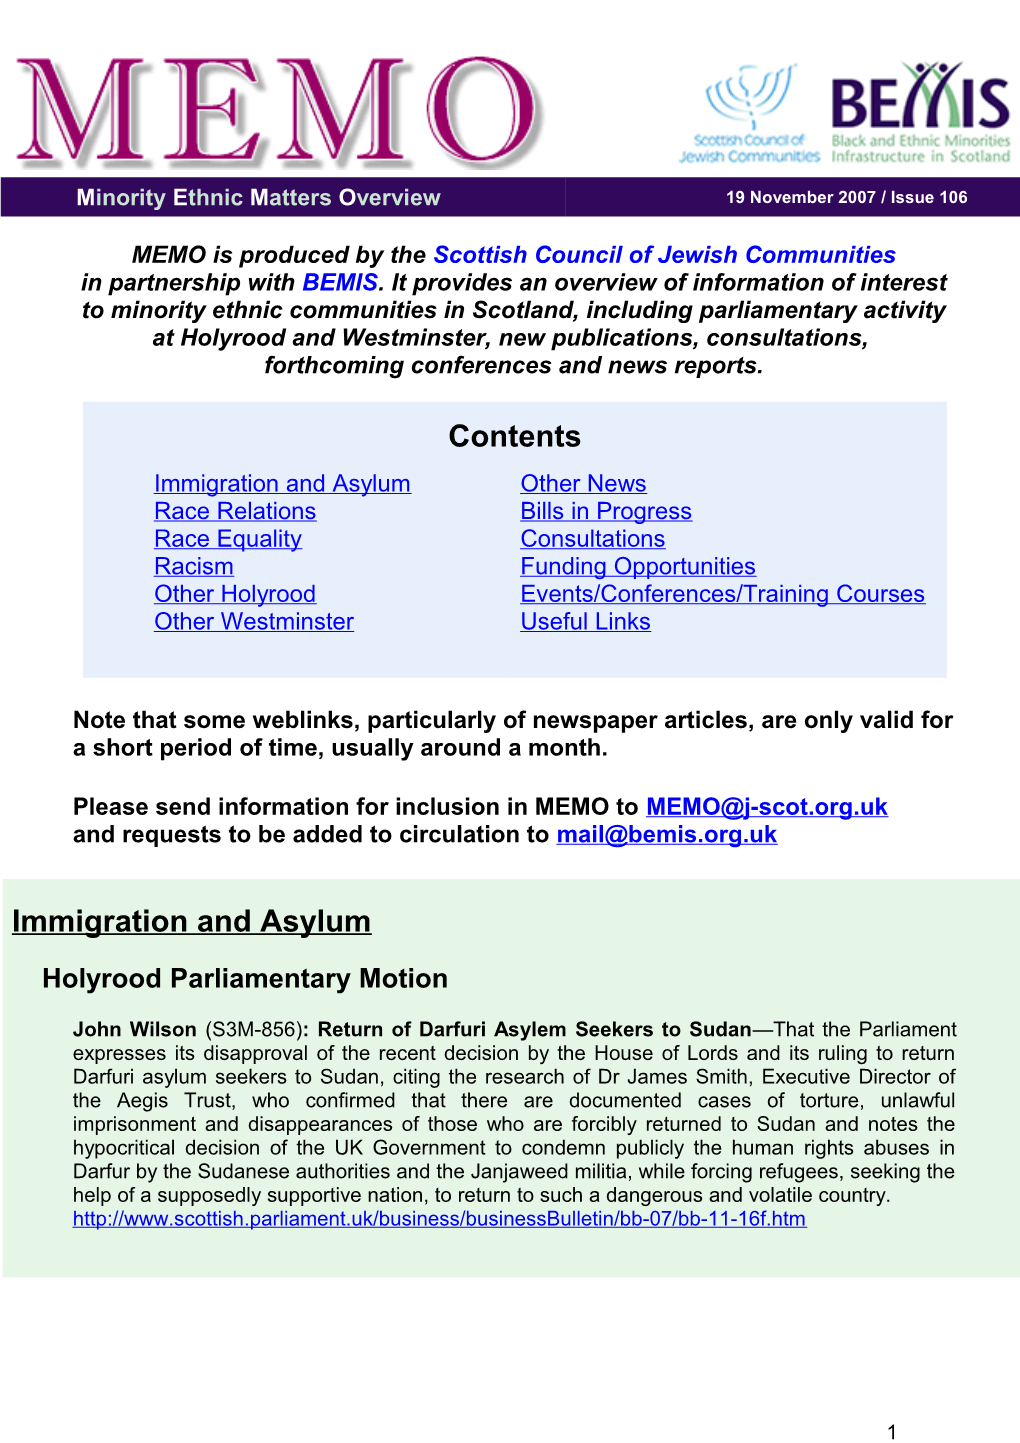 MEMO Is Produced by the Scottish Council of Jewish Communities